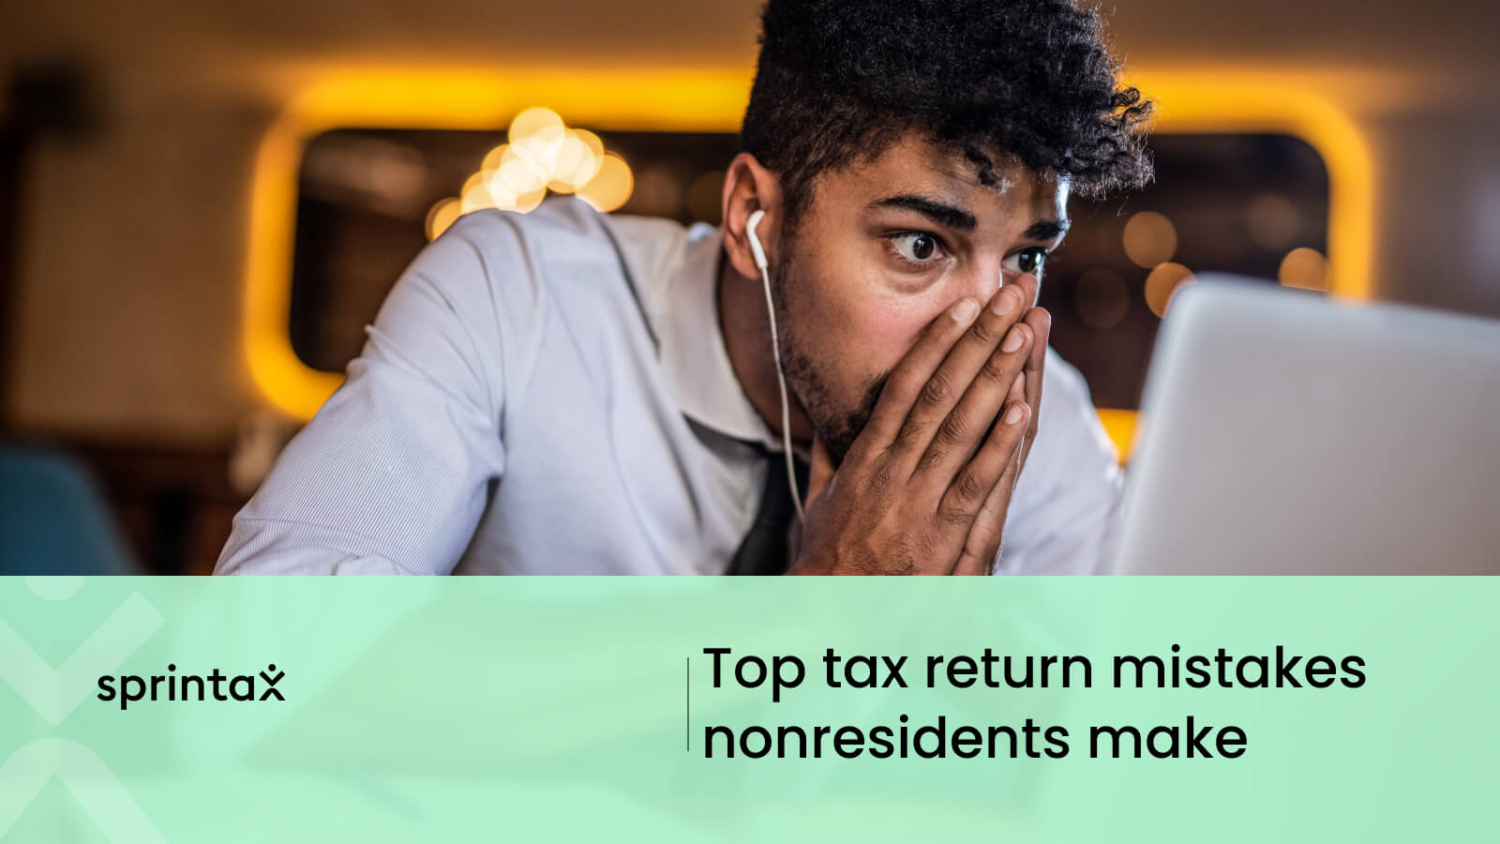 Tax return mistakes nonresidents